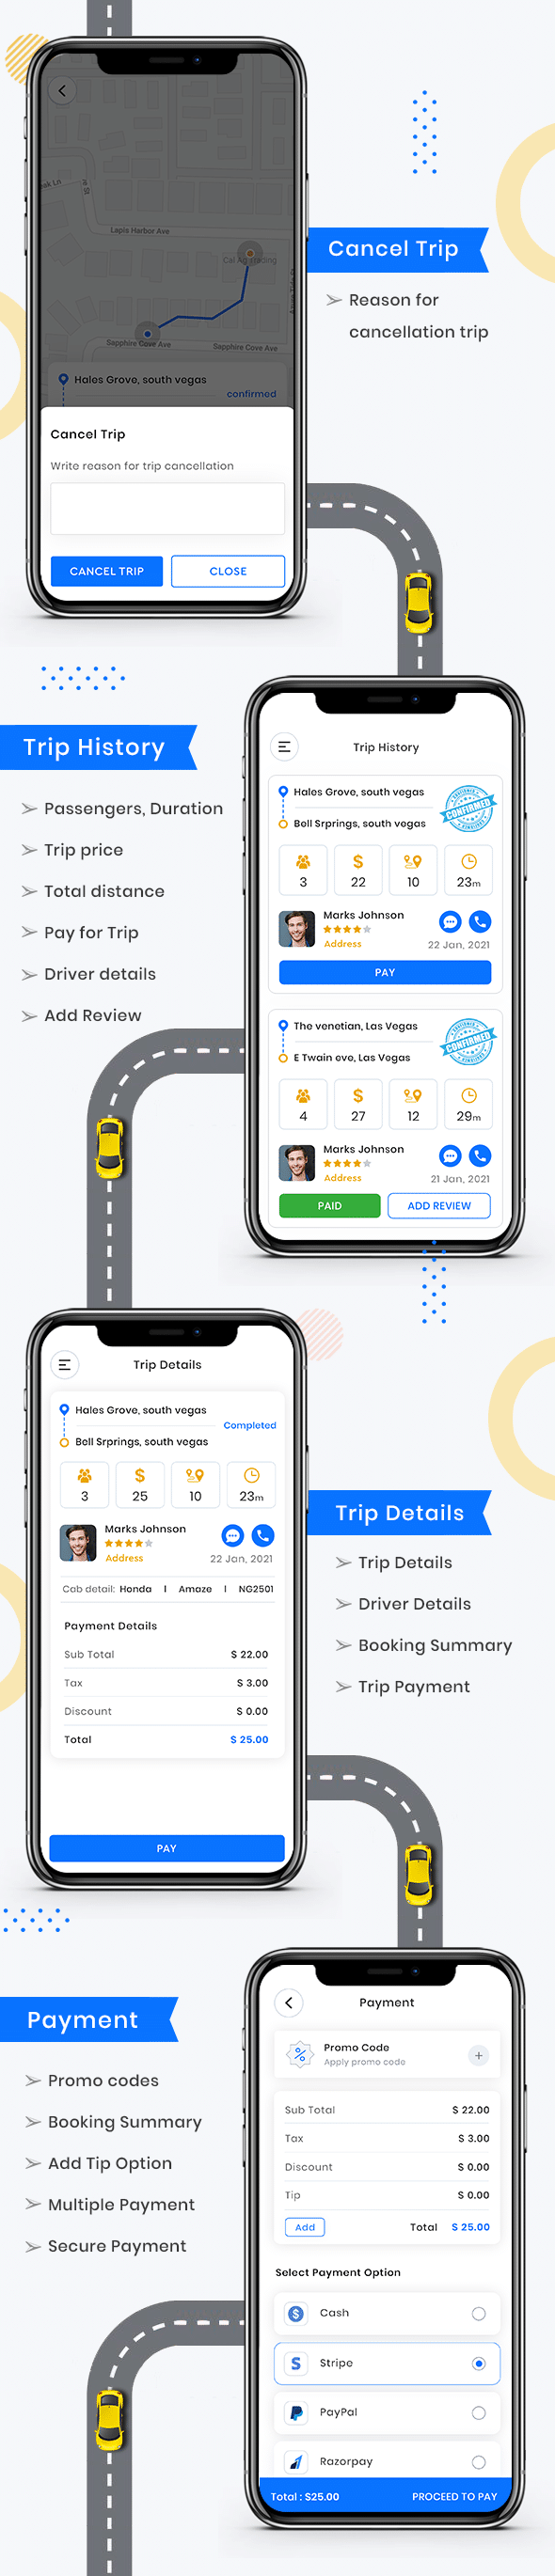 CabME - Flutter Complete Taxi Booking Solution - 8